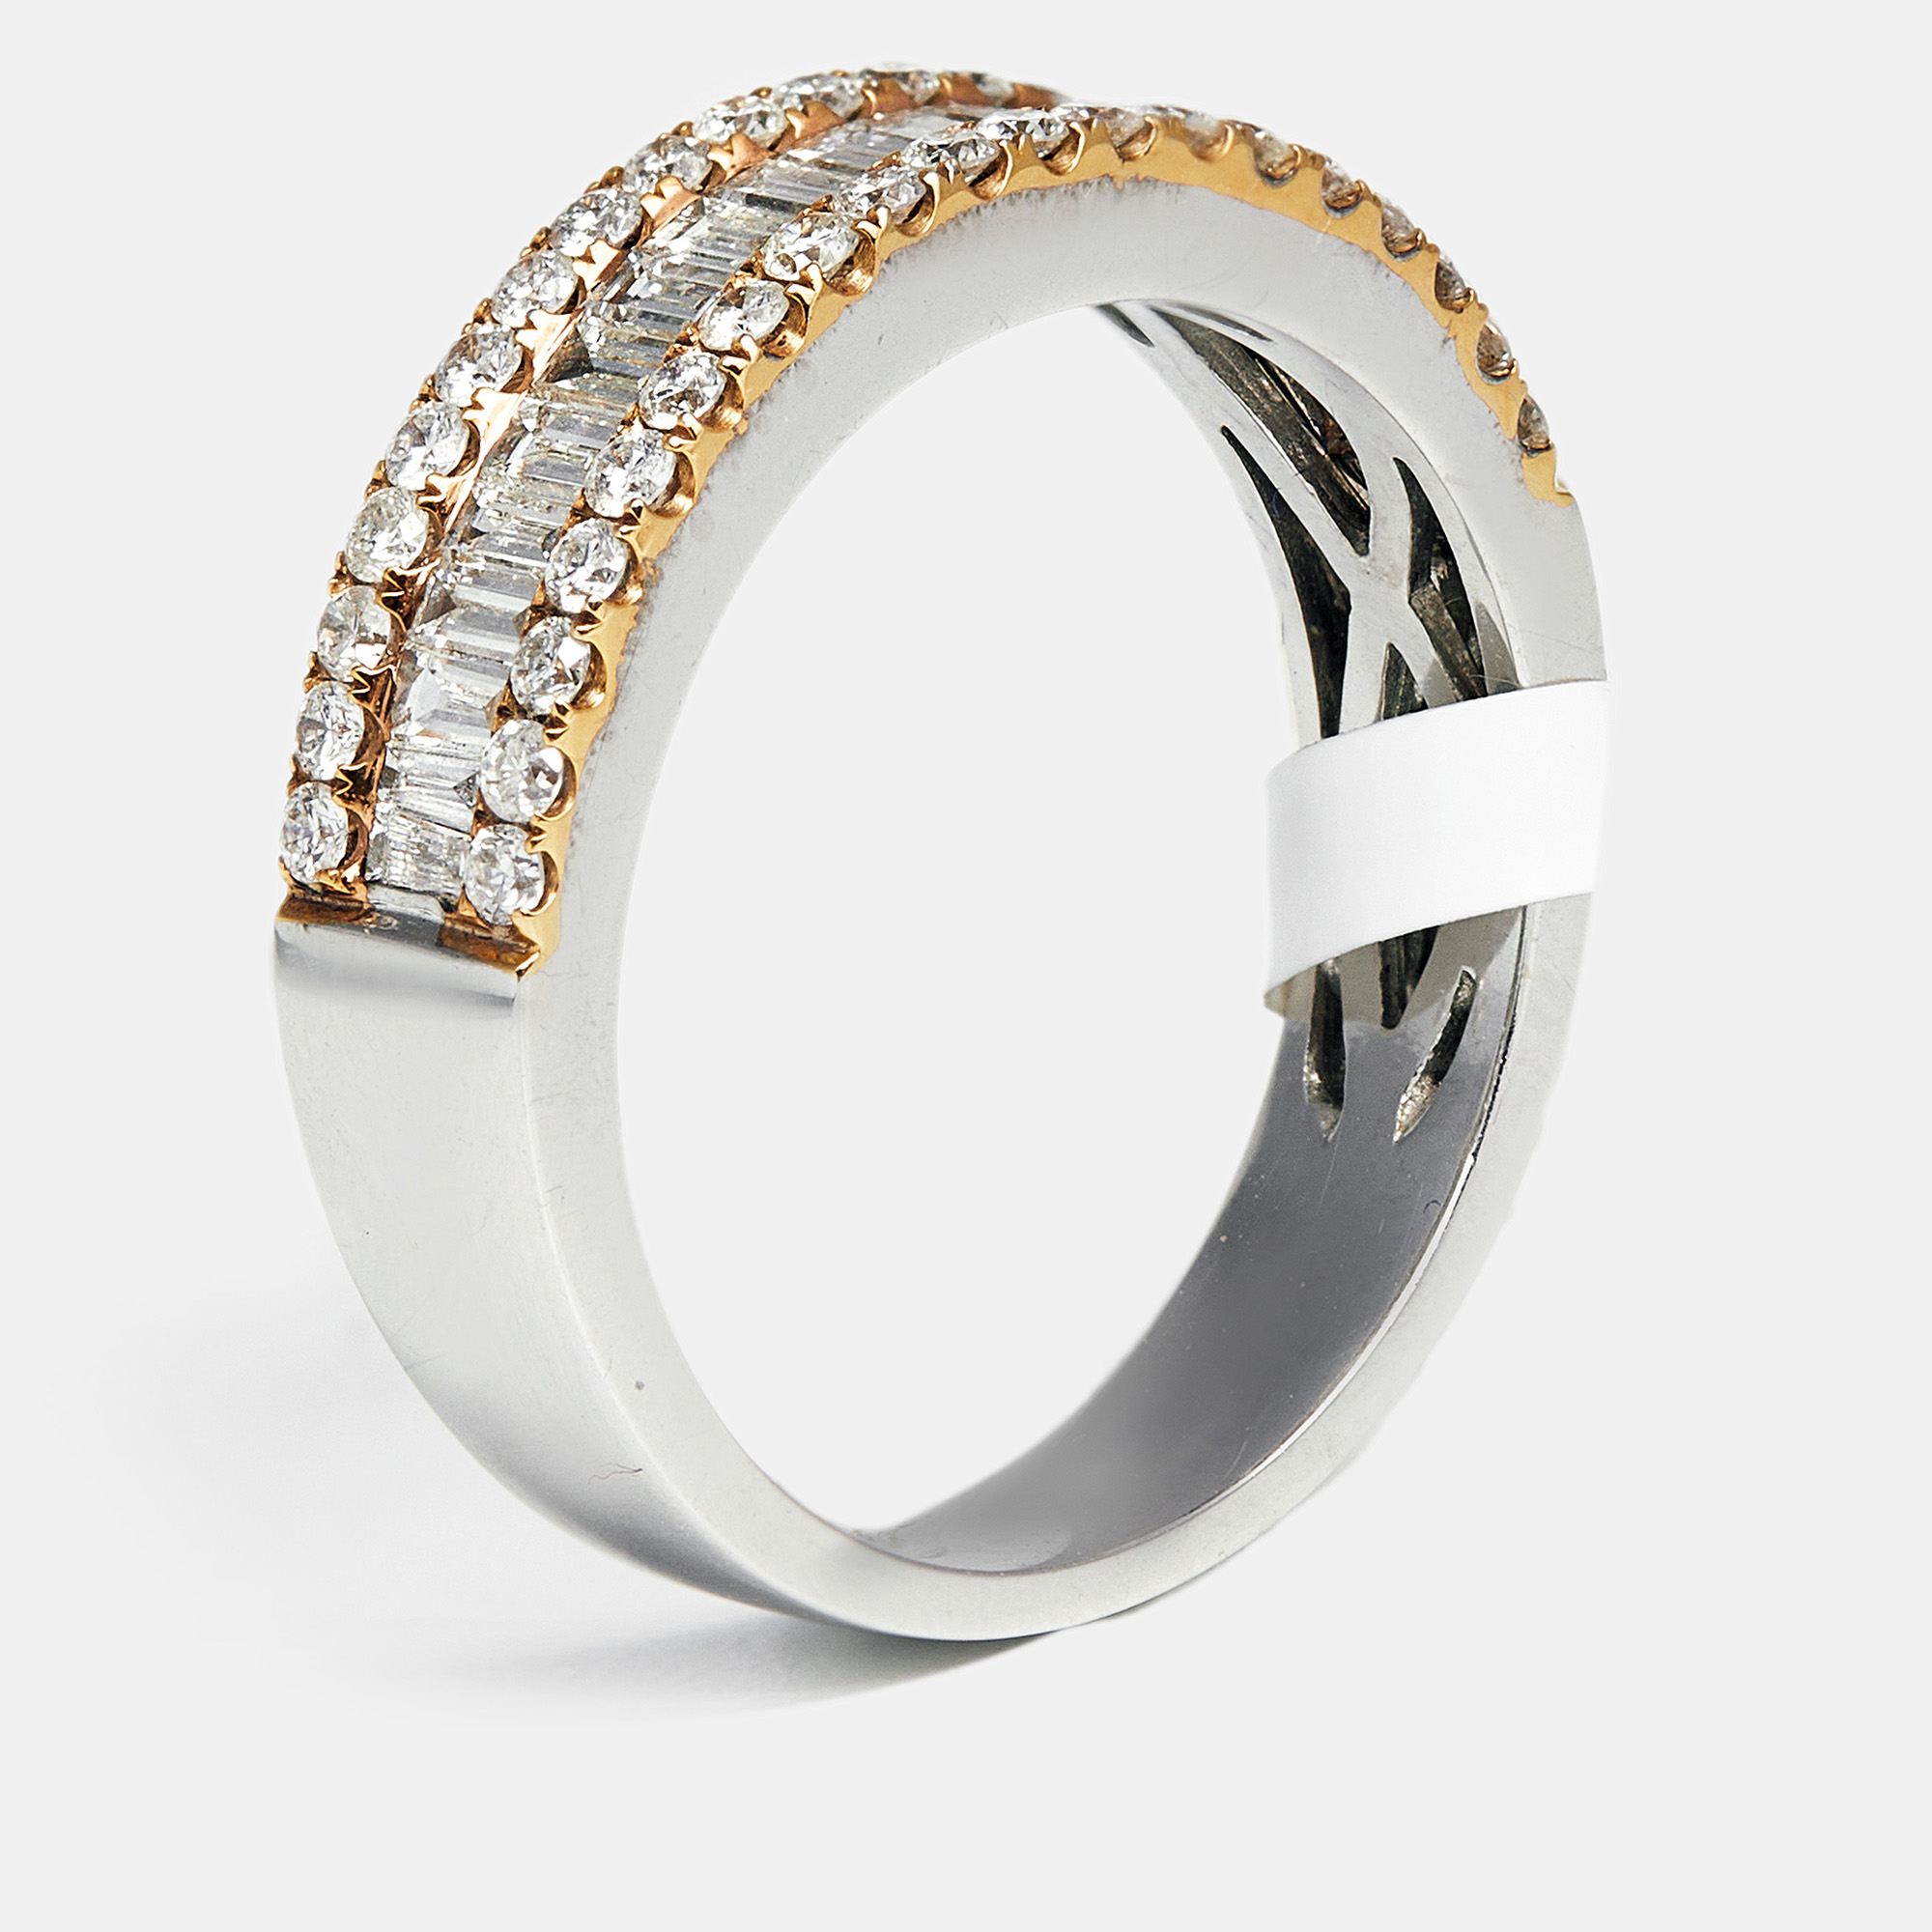 The diamond edit classic baguette round diamond 1.06 ct 18k two tone gold ring size 55